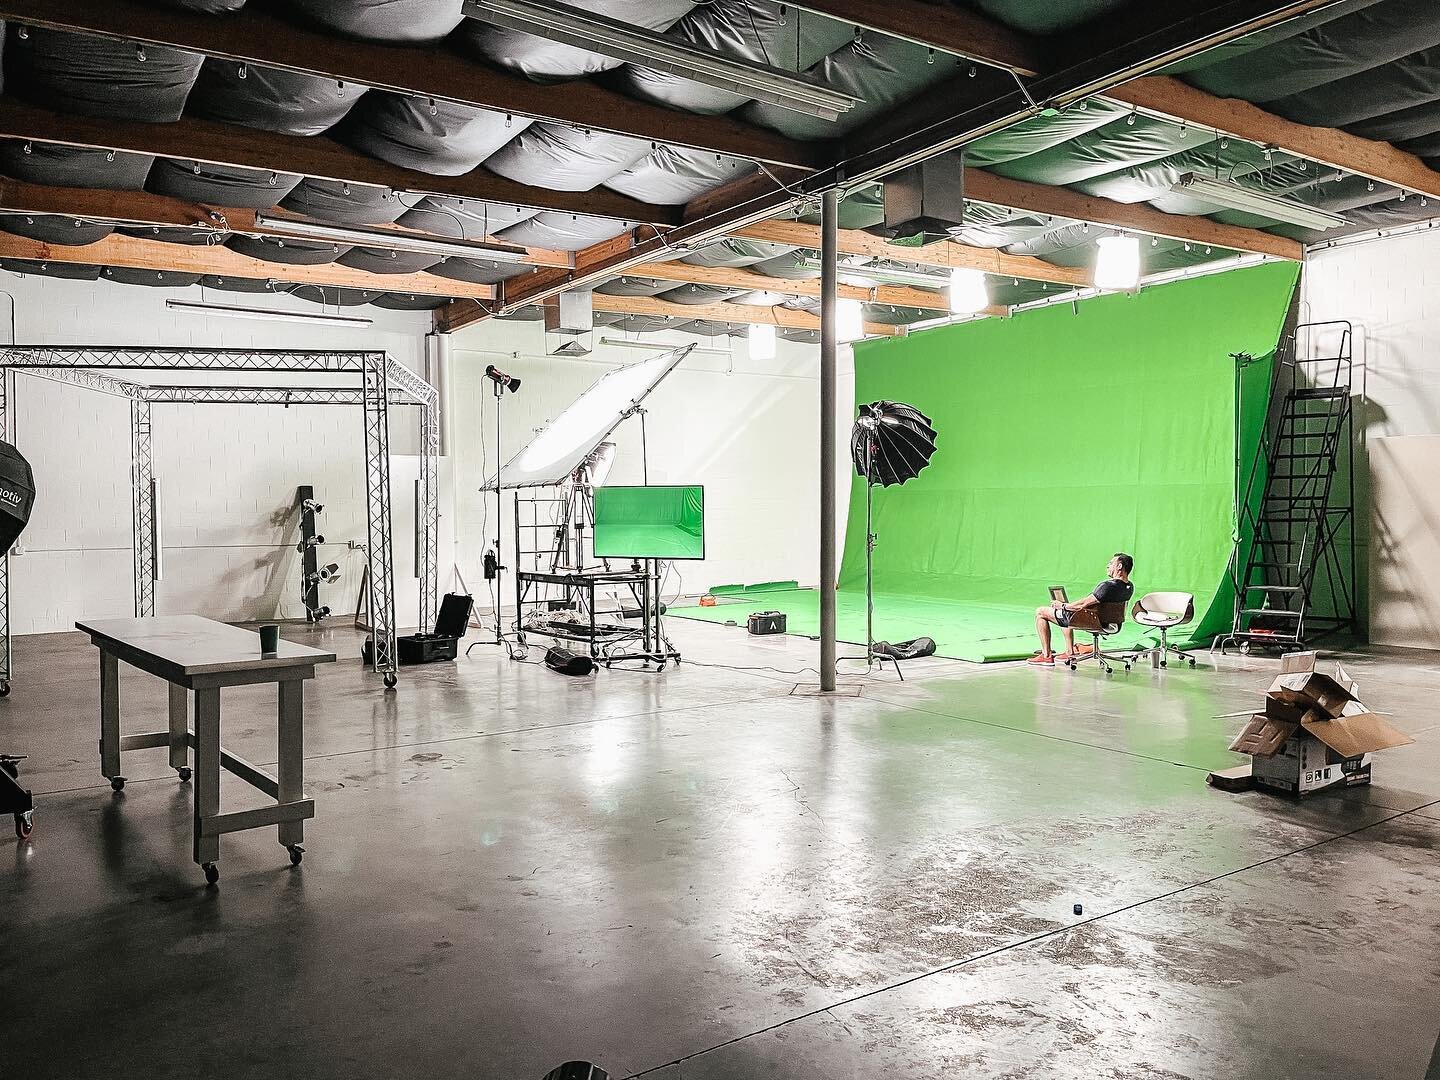 We love our 30ft wide green screen that we can set up in just minutes. This shoot if for a long term client who needs to replicate the same over time. We have managed to match their content for over 5 years. Green screens allow loads of creativity an